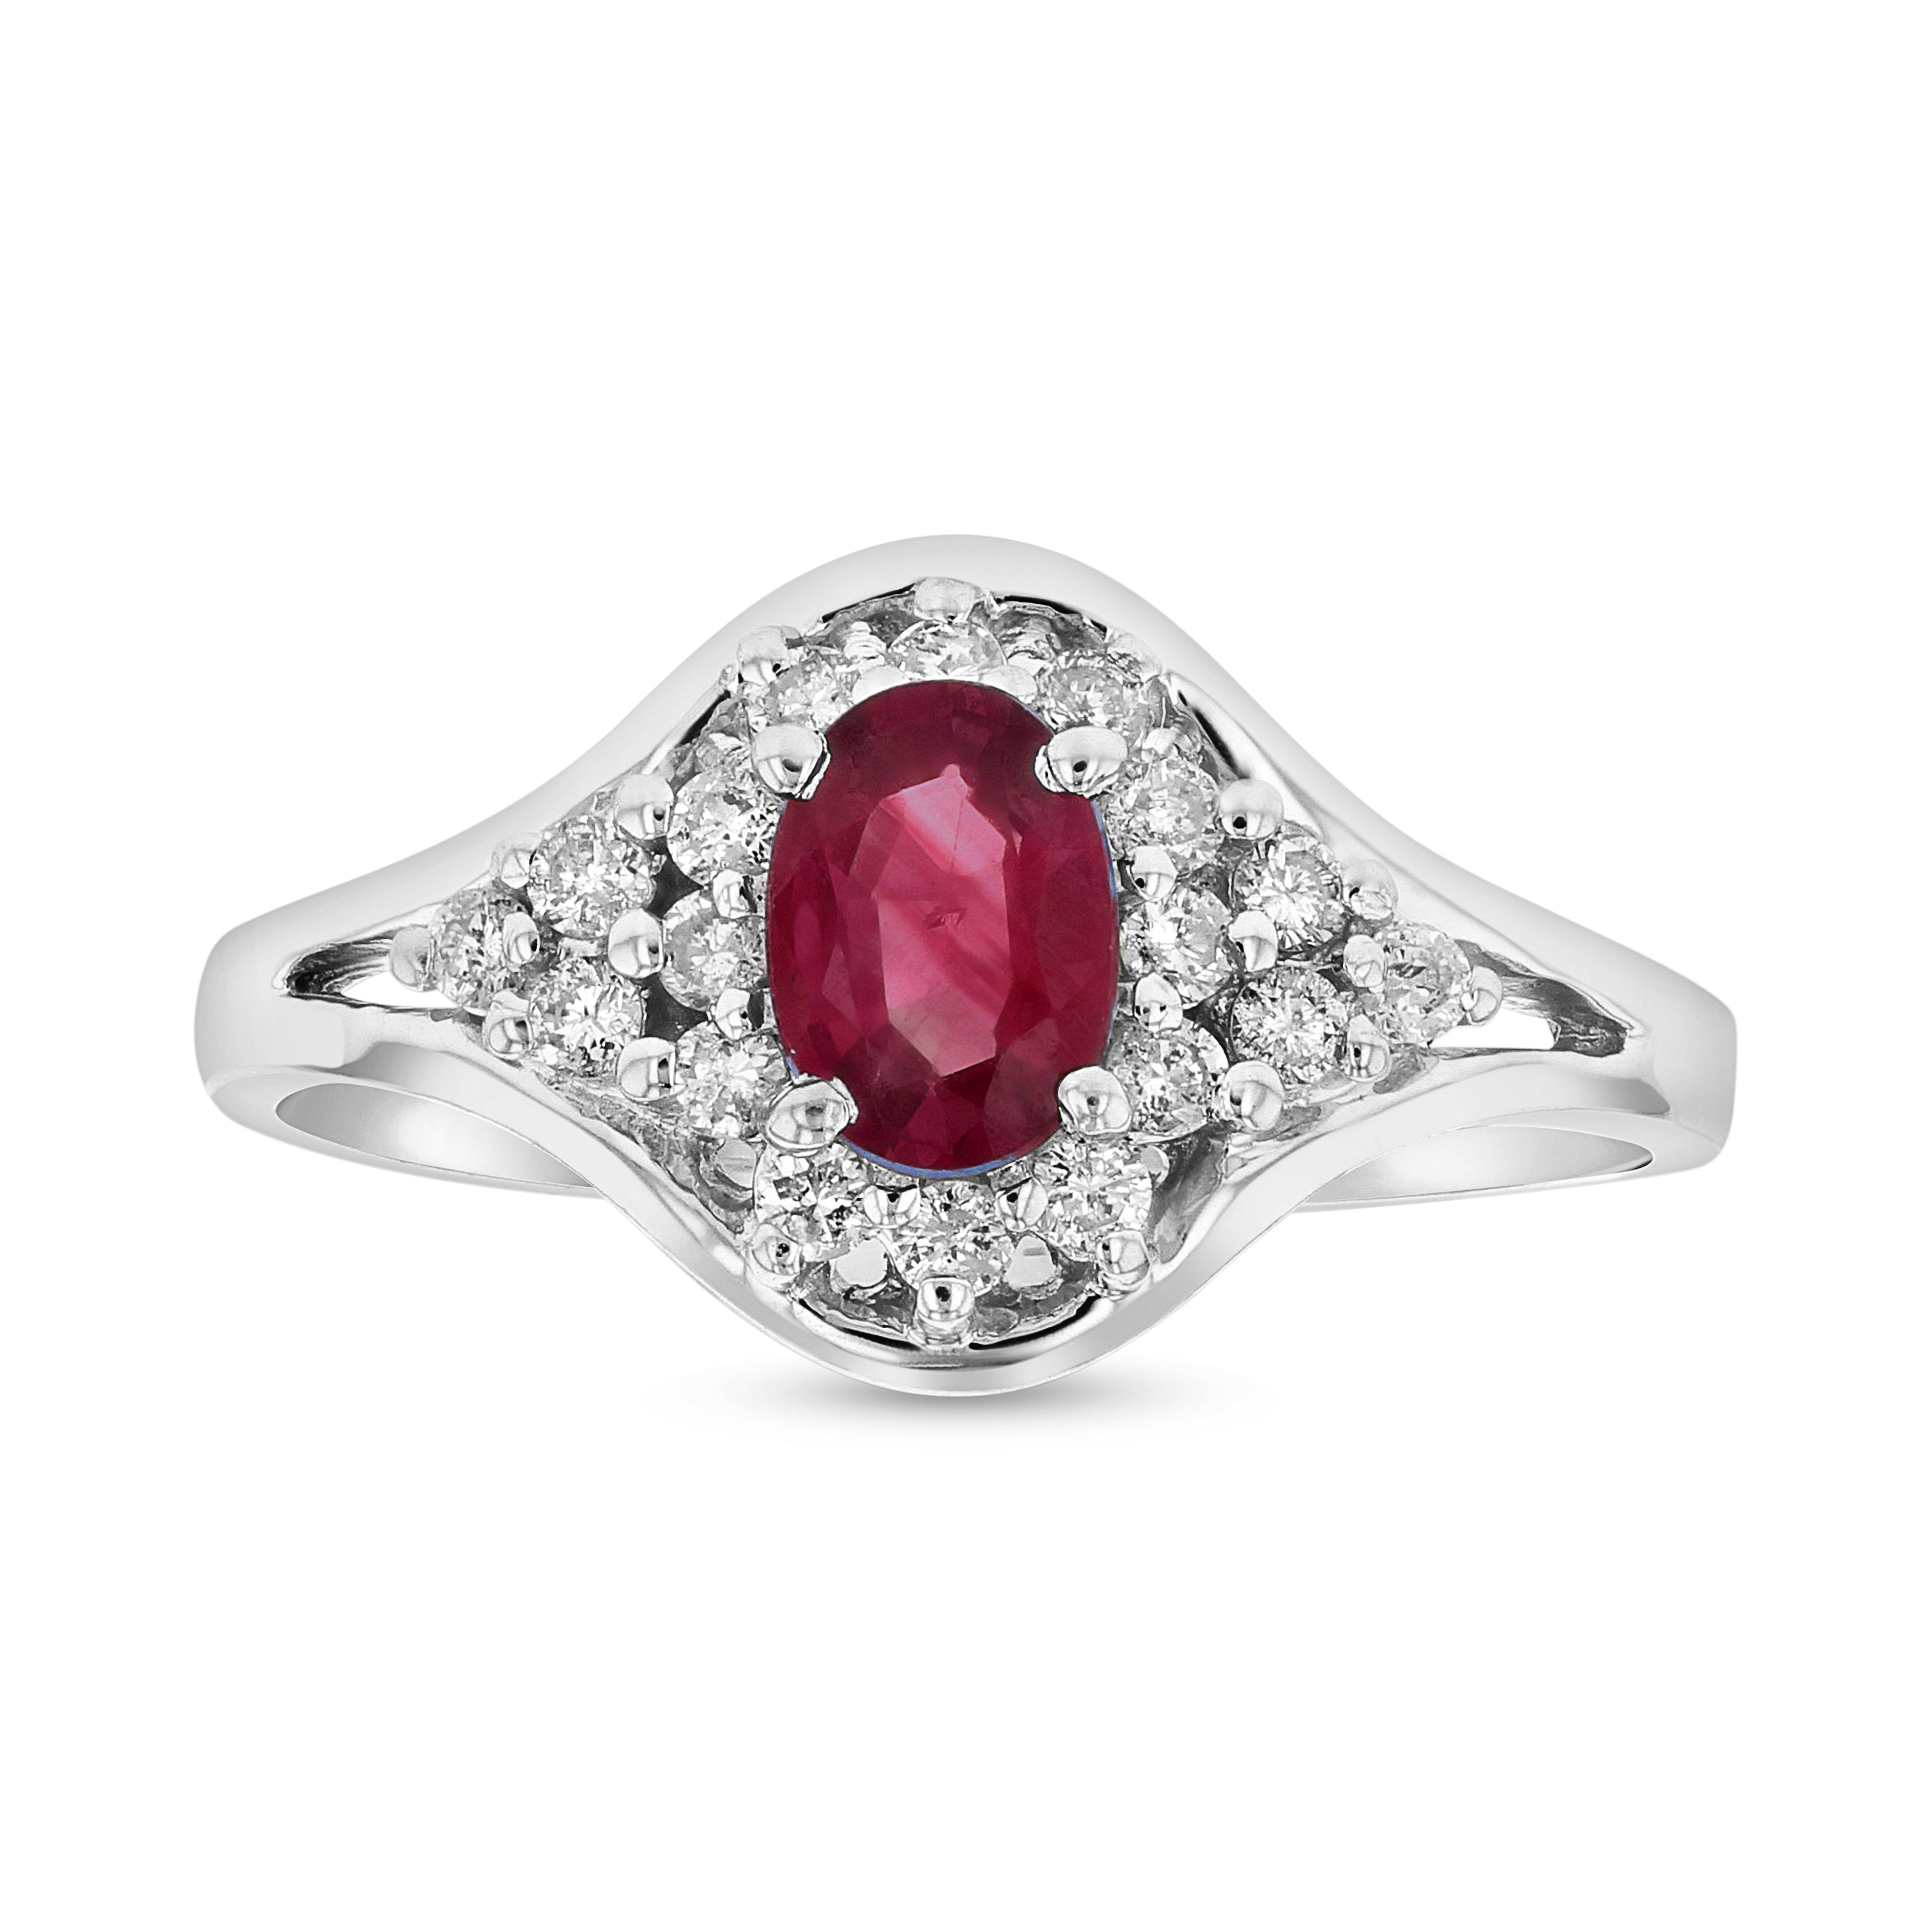 View 0.70ctw Diamond and RUby Ring in 14k White Gold